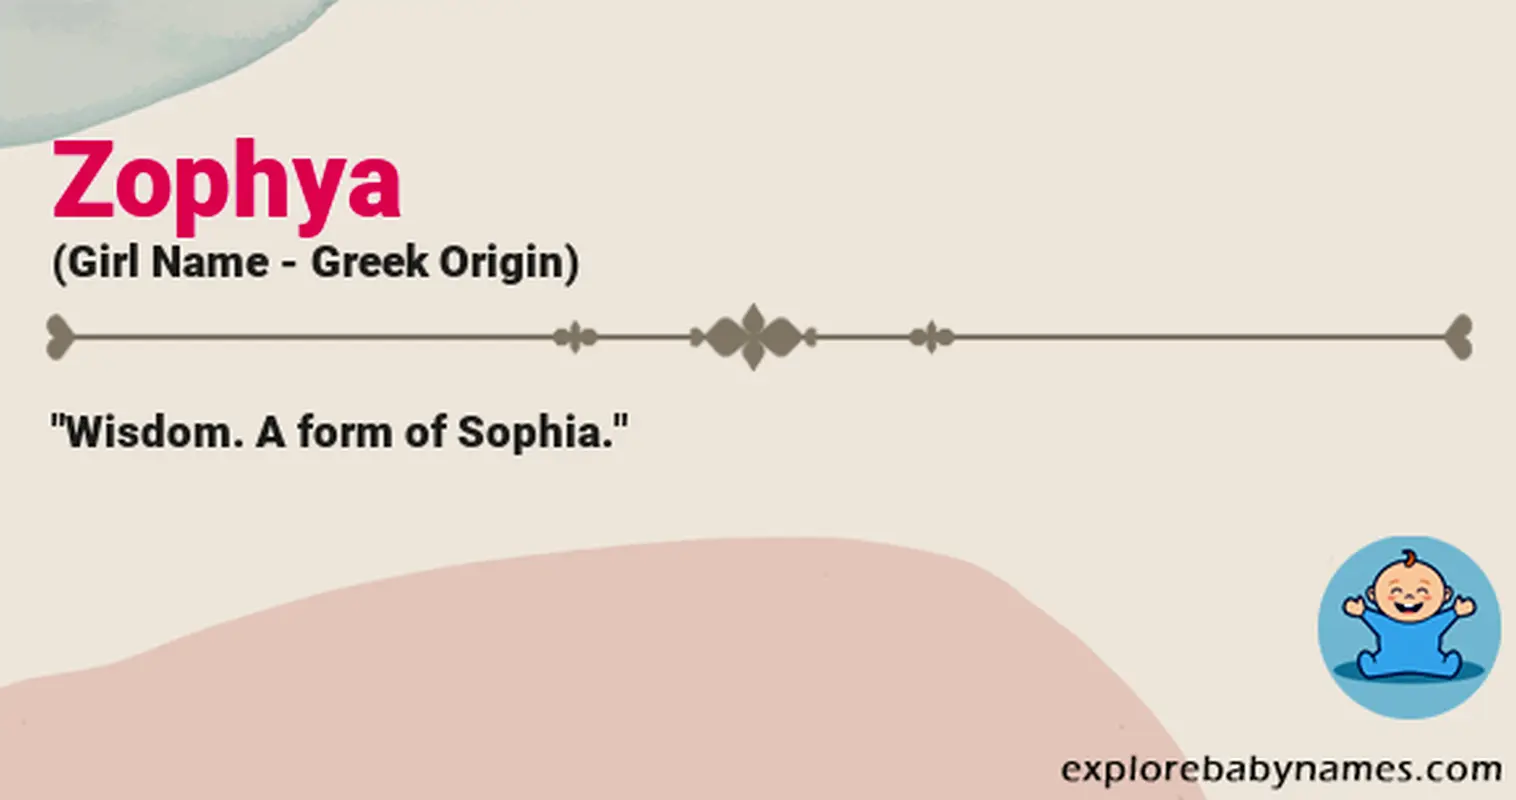 Meaning of Zophya